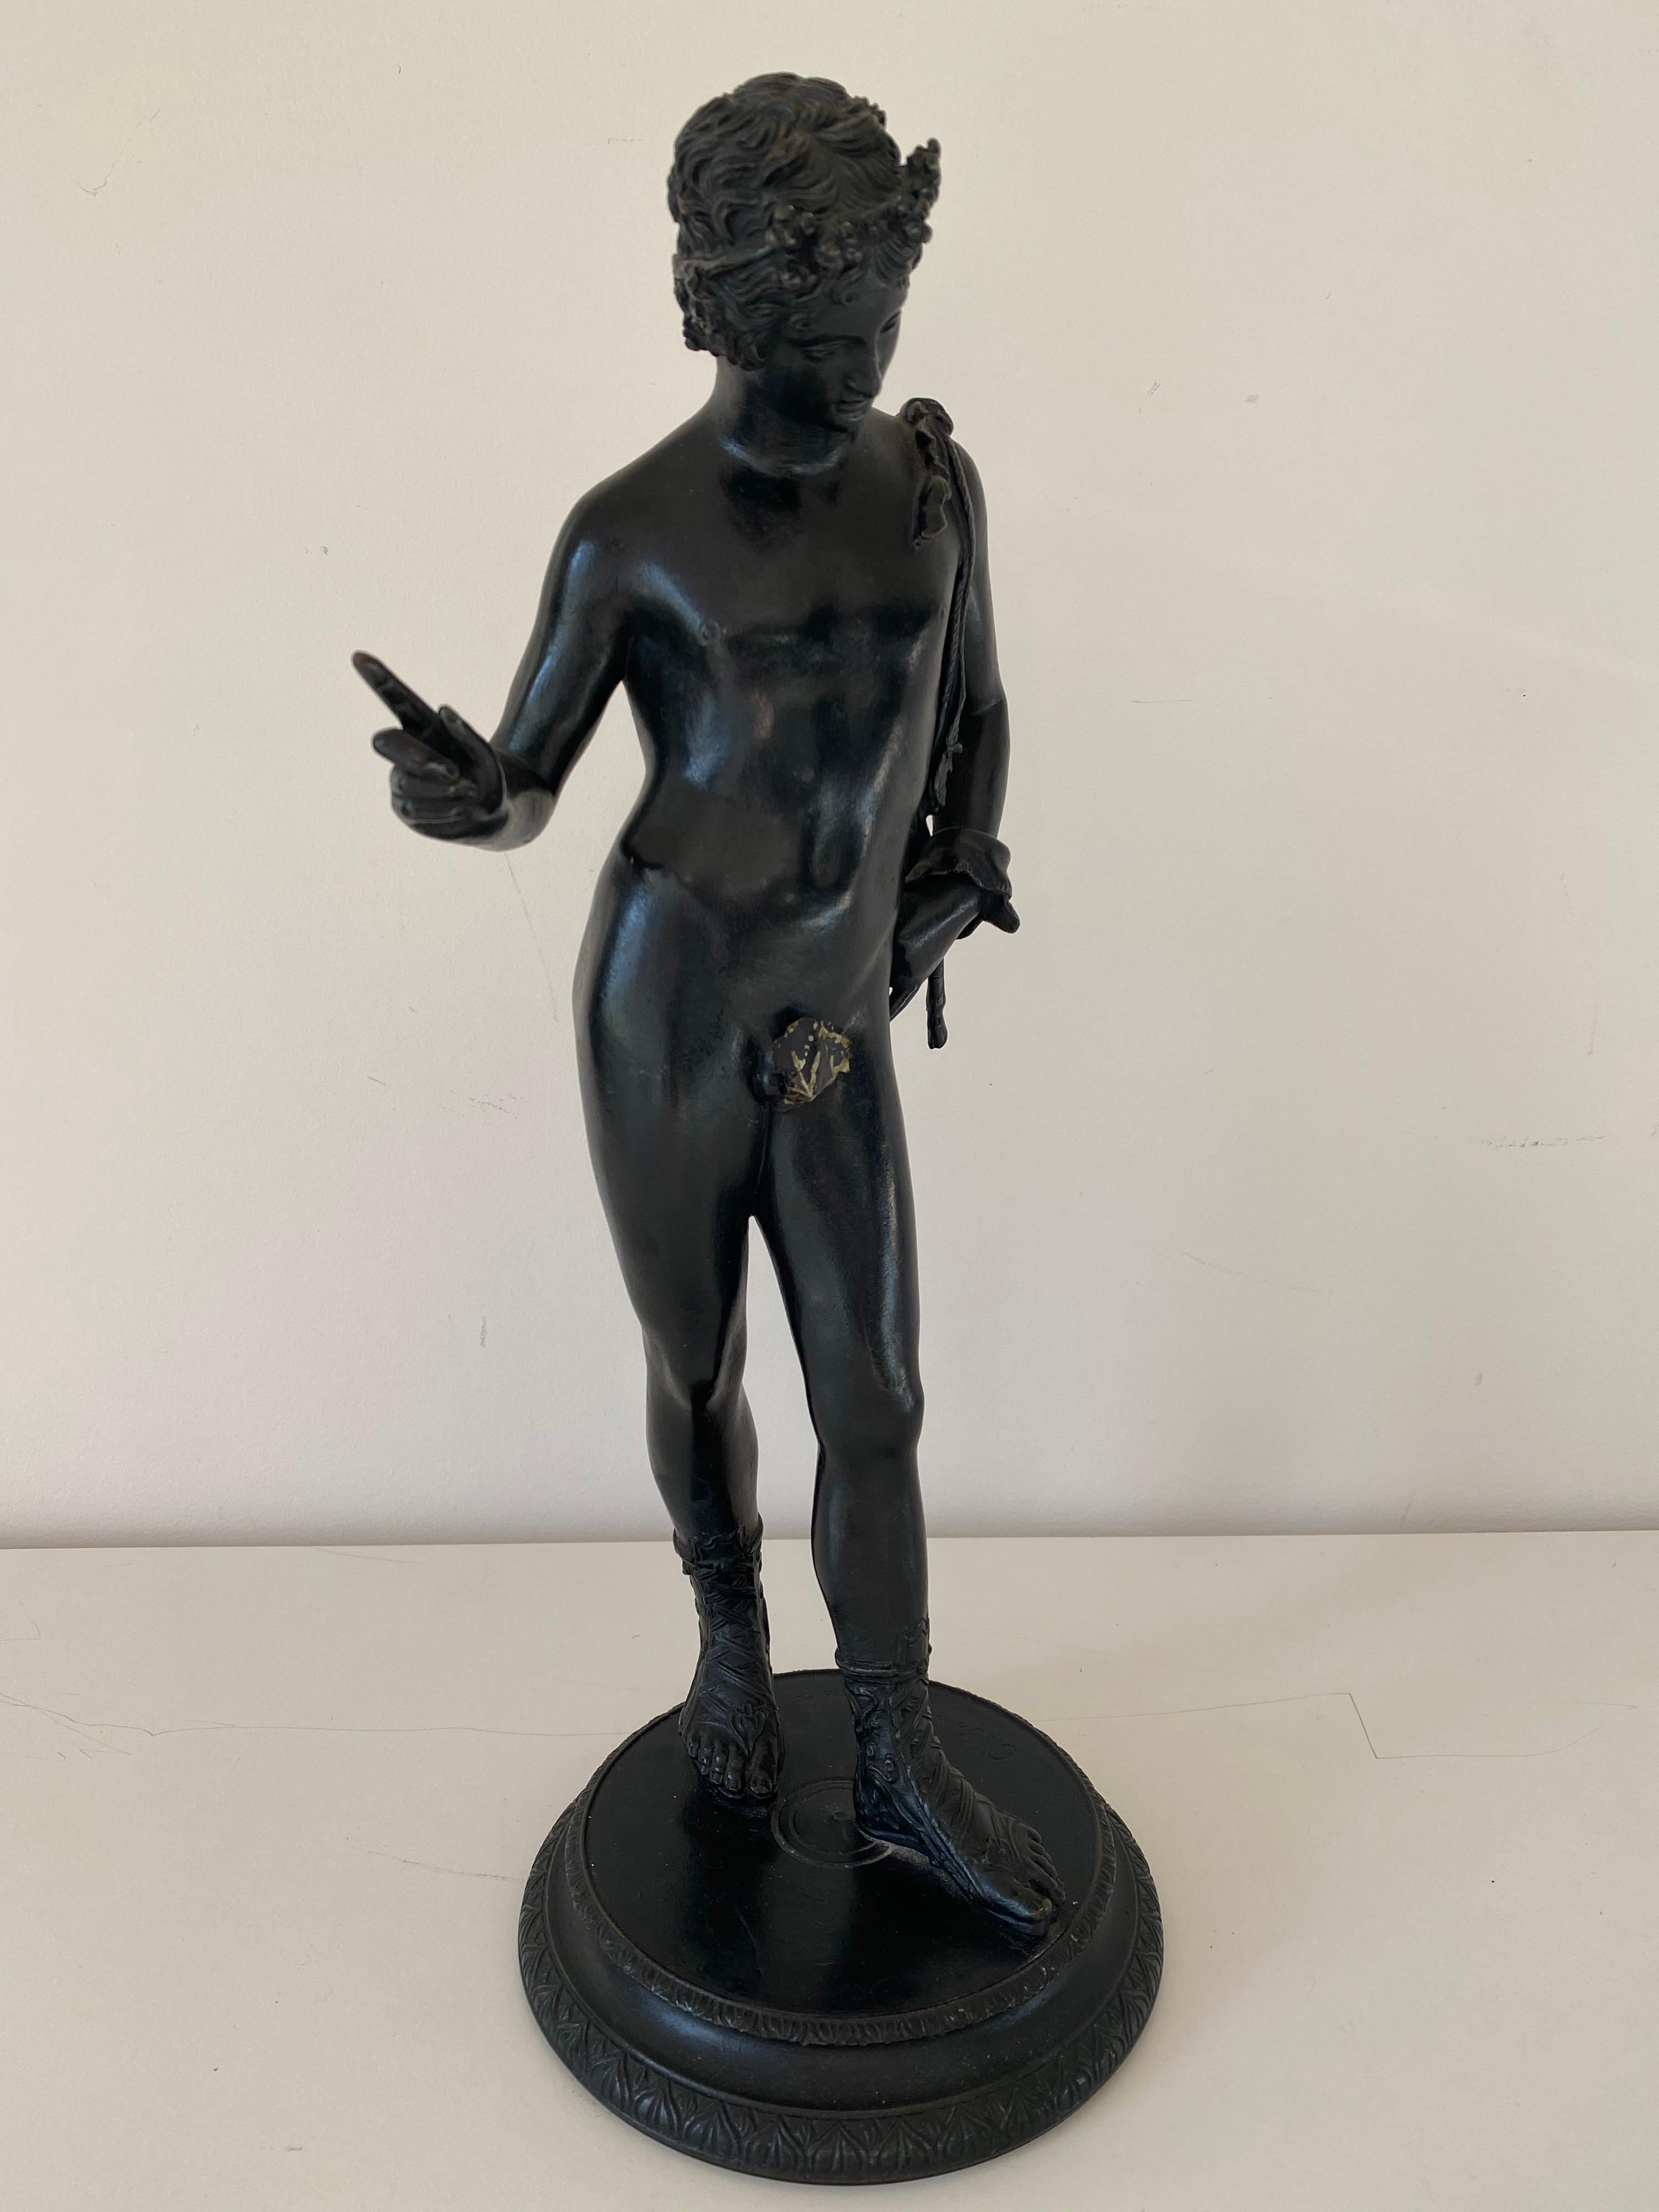 A 19th century Grand Tour bronze statue of Narcissus. Foundry mark Sommer Napoli engraved on circular plinth. Includes original Victorian era detachable fig leaf.